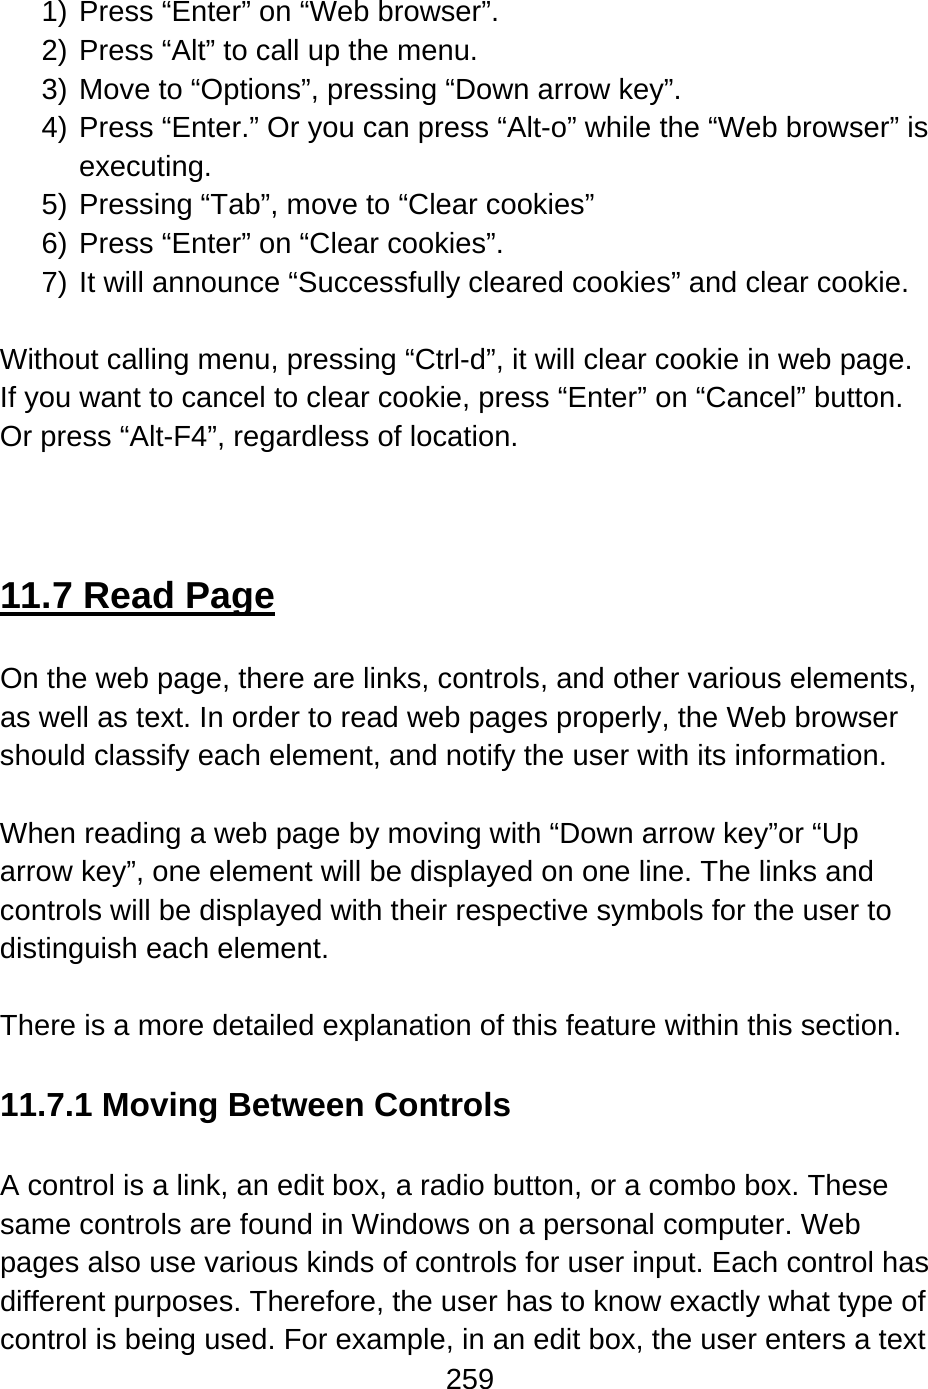 259   1) Press “Enter” on “Web browser”. 2) Press “Alt” to call up the menu. 3) Move to “Options”, pressing “Down arrow key”. 4) Press “Enter.” Or you can press “Alt-o” while the “Web browser” is executing. 5) Pressing “Tab”, move to “Clear cookies” 6) Press “Enter” on “Clear cookies”. 7) It will announce “Successfully cleared cookies” and clear cookie.  Without calling menu, pressing “Ctrl-d”, it will clear cookie in web page. If you want to cancel to clear cookie, press “Enter” on “Cancel” button. Or press “Alt-F4”, regardless of location.    11.7 Read Page  On the web page, there are links, controls, and other various elements, as well as text. In order to read web pages properly, the Web browser should classify each element, and notify the user with its information.  When reading a web page by moving with “Down arrow key”or “Up arrow key”, one element will be displayed on one line. The links and controls will be displayed with their respective symbols for the user to distinguish each element.  There is a more detailed explanation of this feature within this section.  11.7.1 Moving Between Controls  A control is a link, an edit box, a radio button, or a combo box. These same controls are found in Windows on a personal computer. Web pages also use various kinds of controls for user input. Each control has different purposes. Therefore, the user has to know exactly what type of control is being used. For example, in an edit box, the user enters a text 